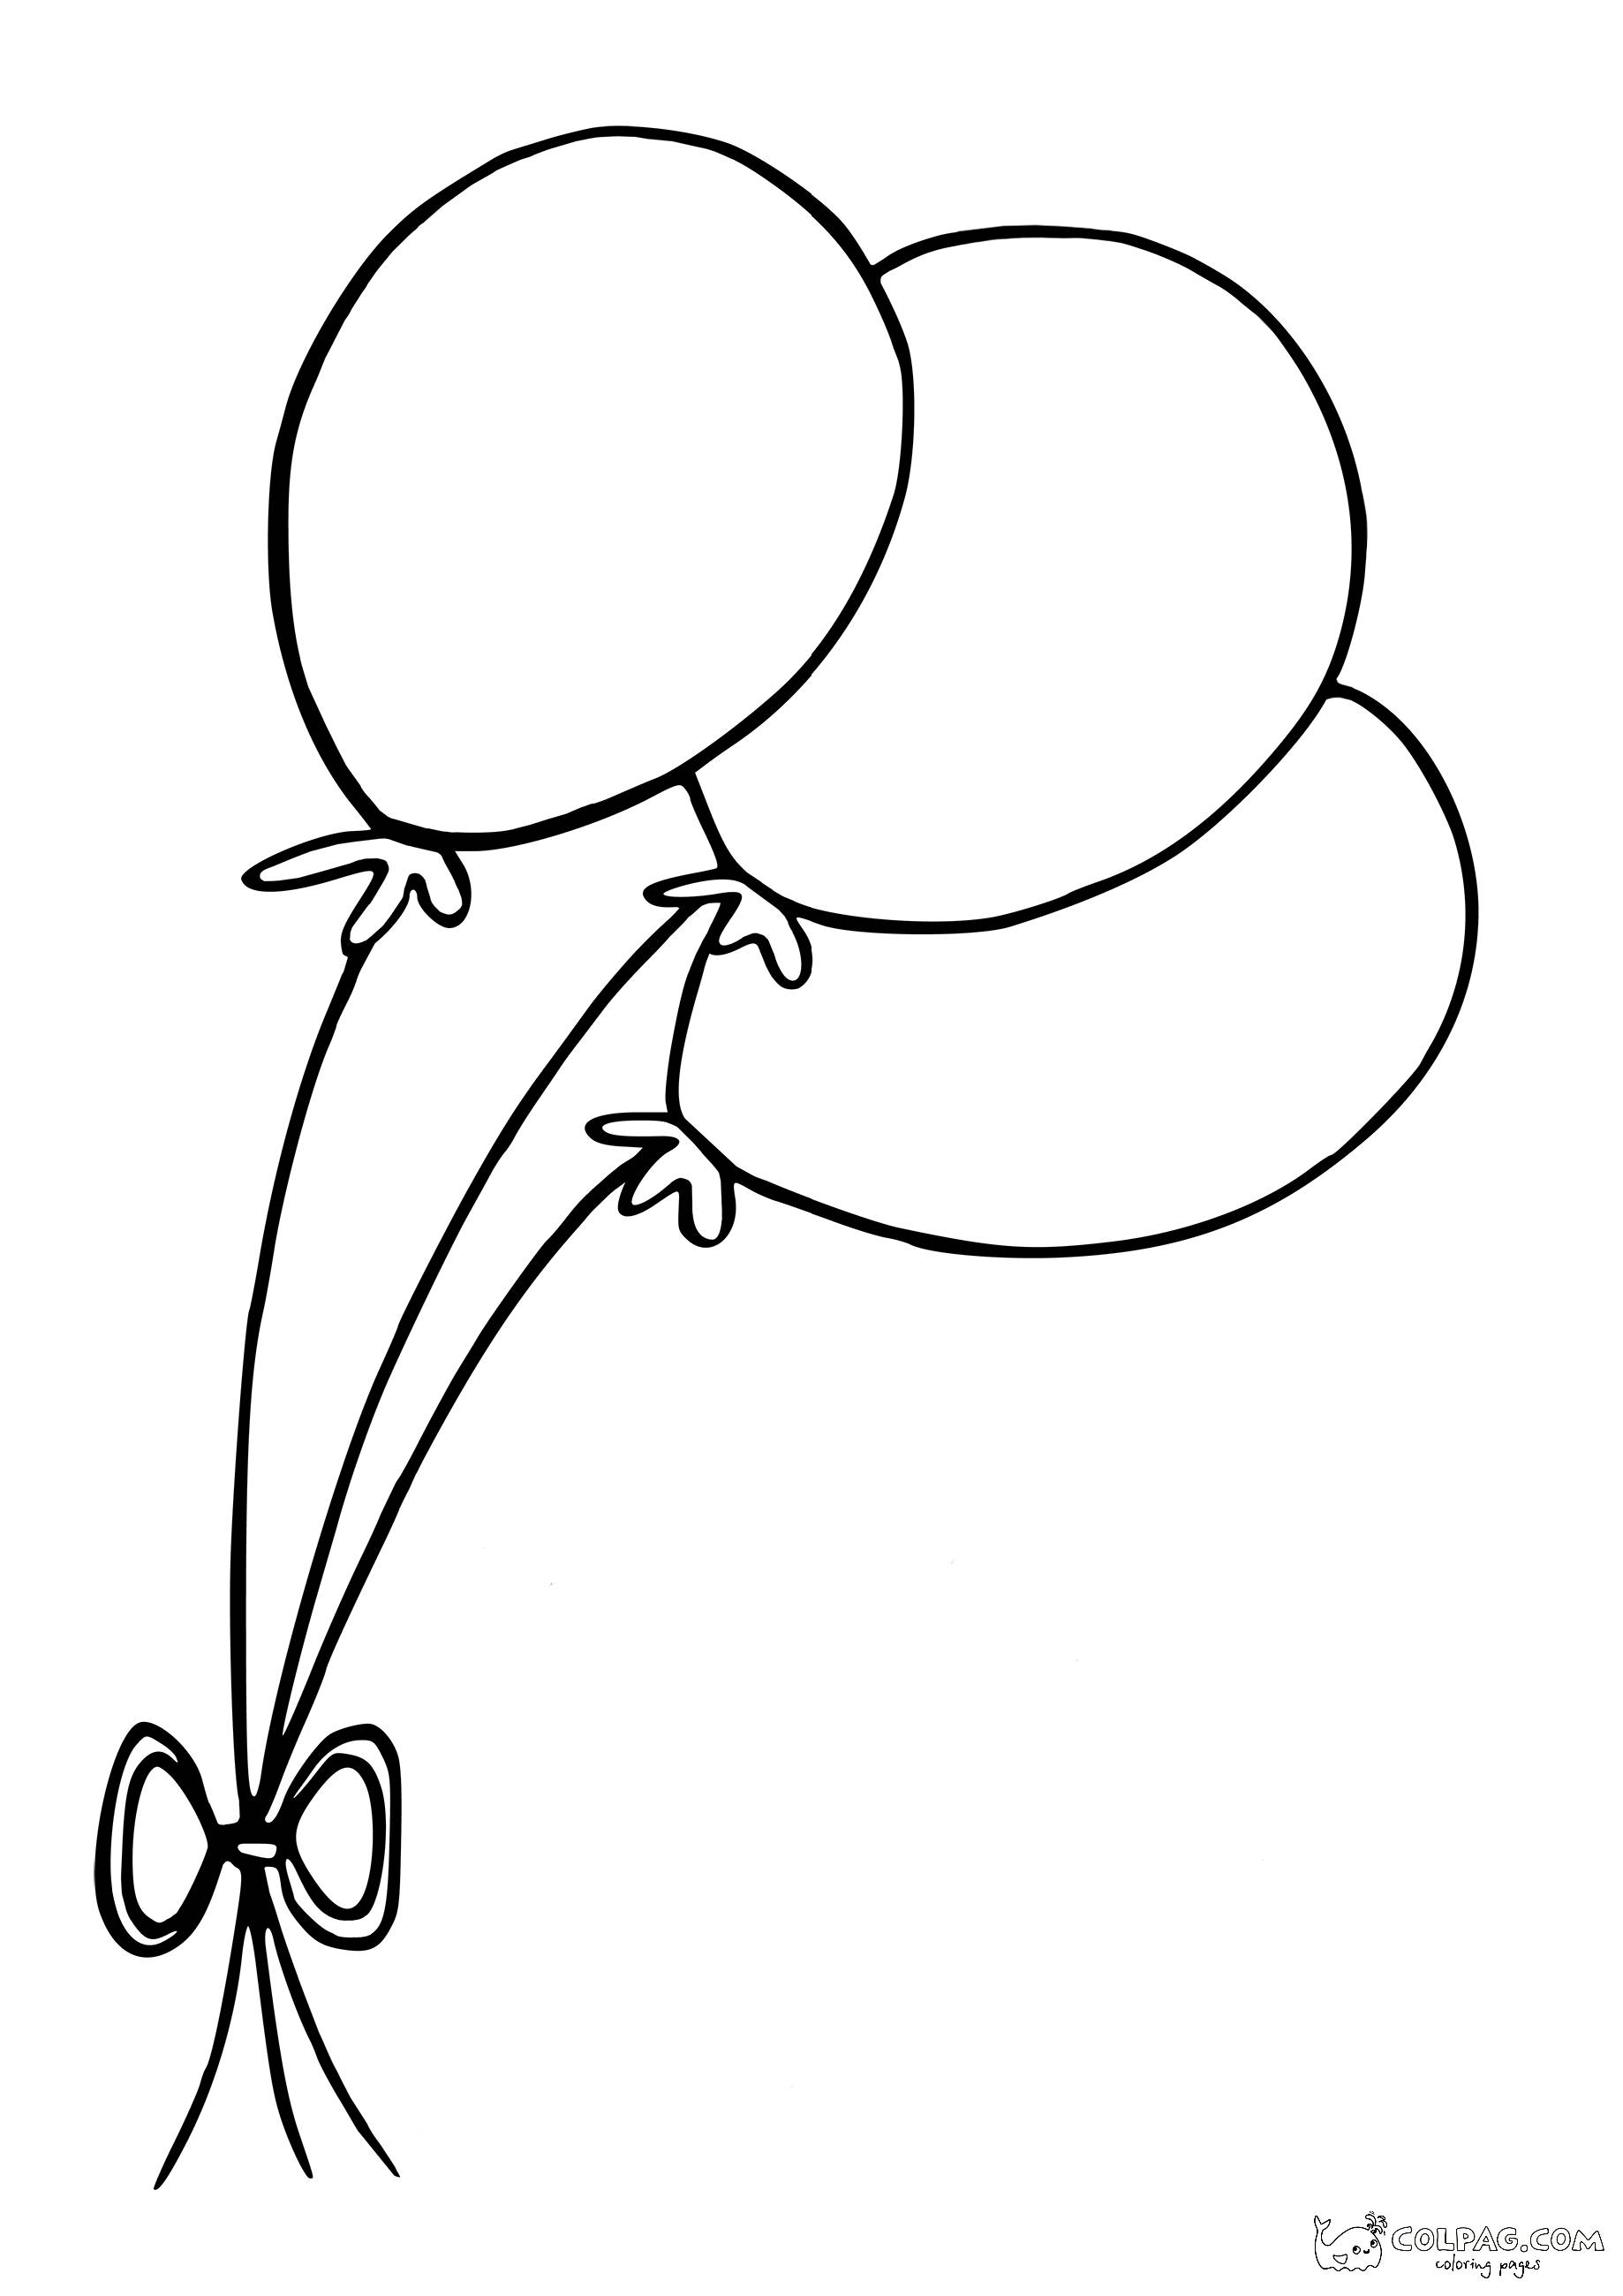 11-three-baloons-with-bow-coloring-page-colpag-11